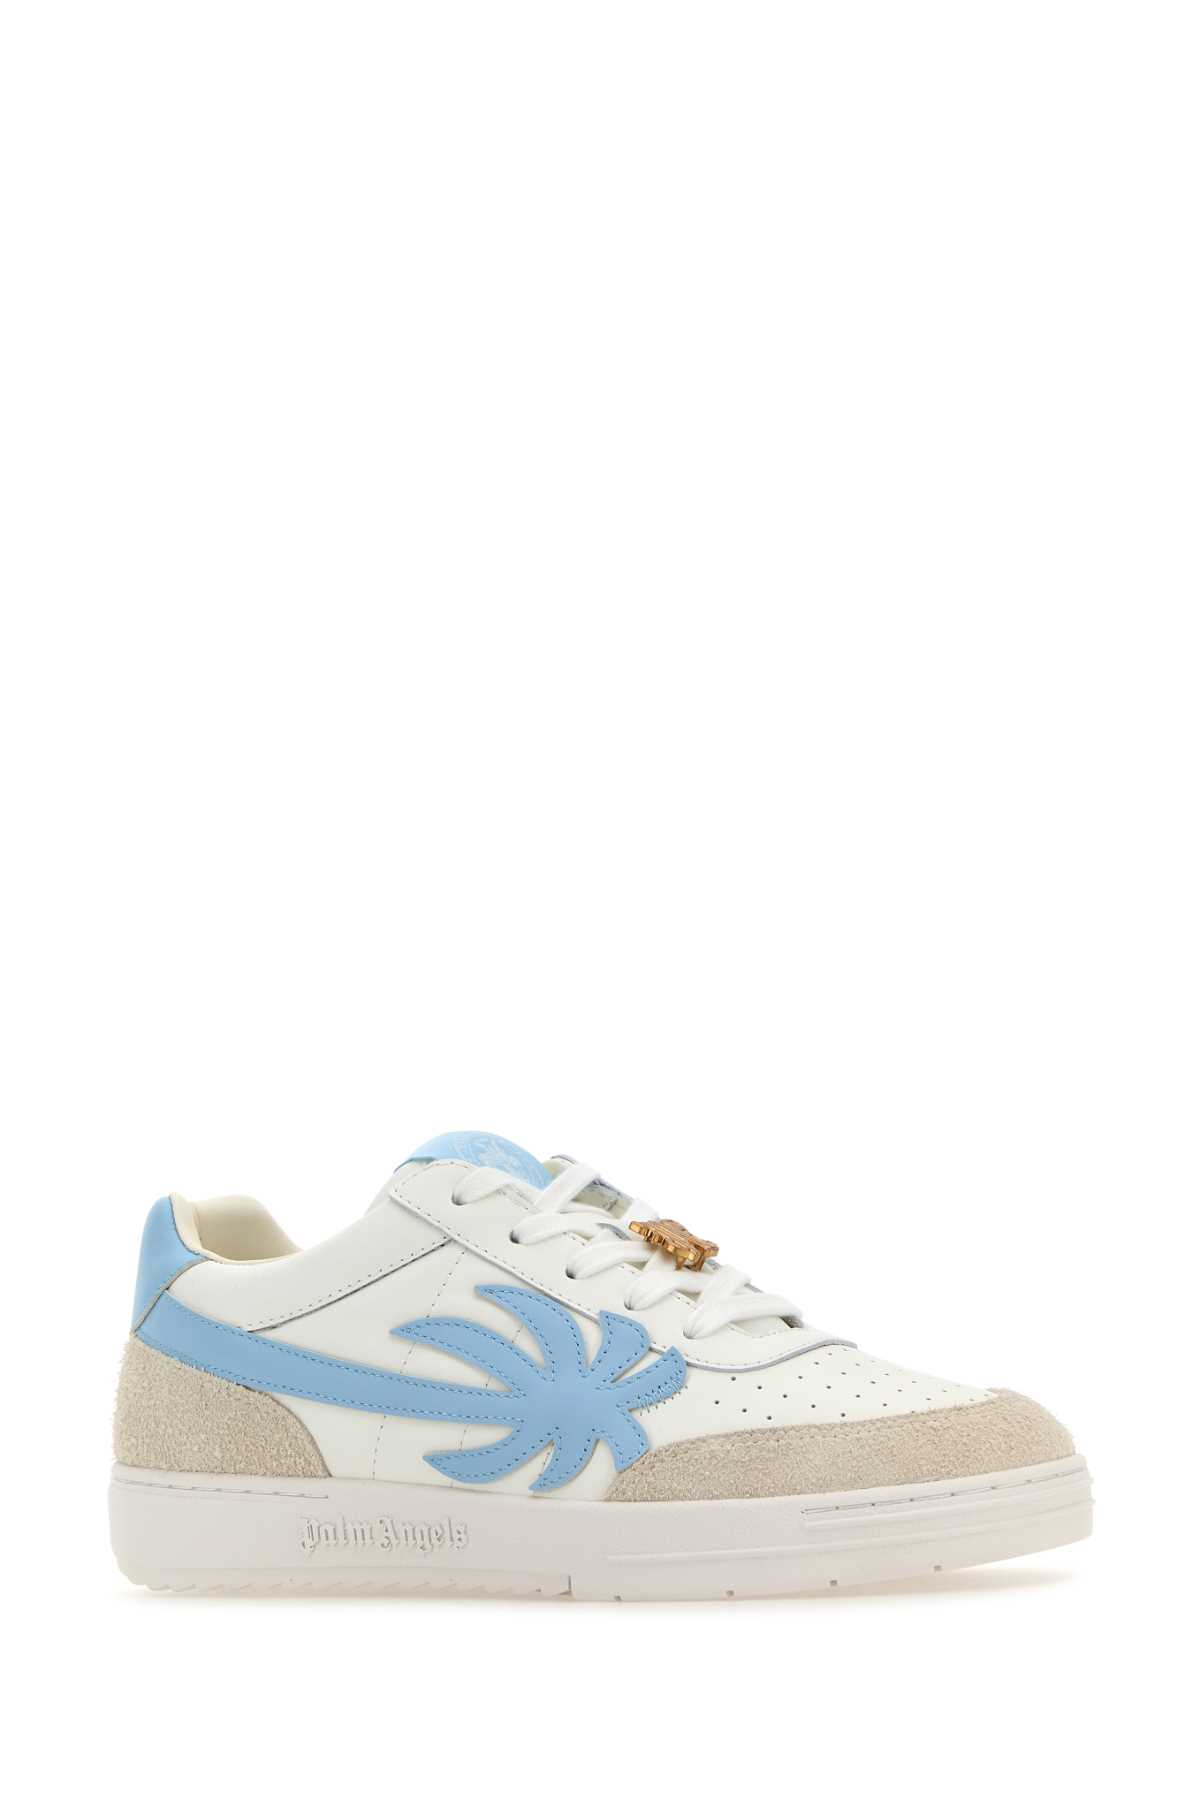 Palm Angels Multicolor Leather Palm Beach University Sneakers In Whiteligh